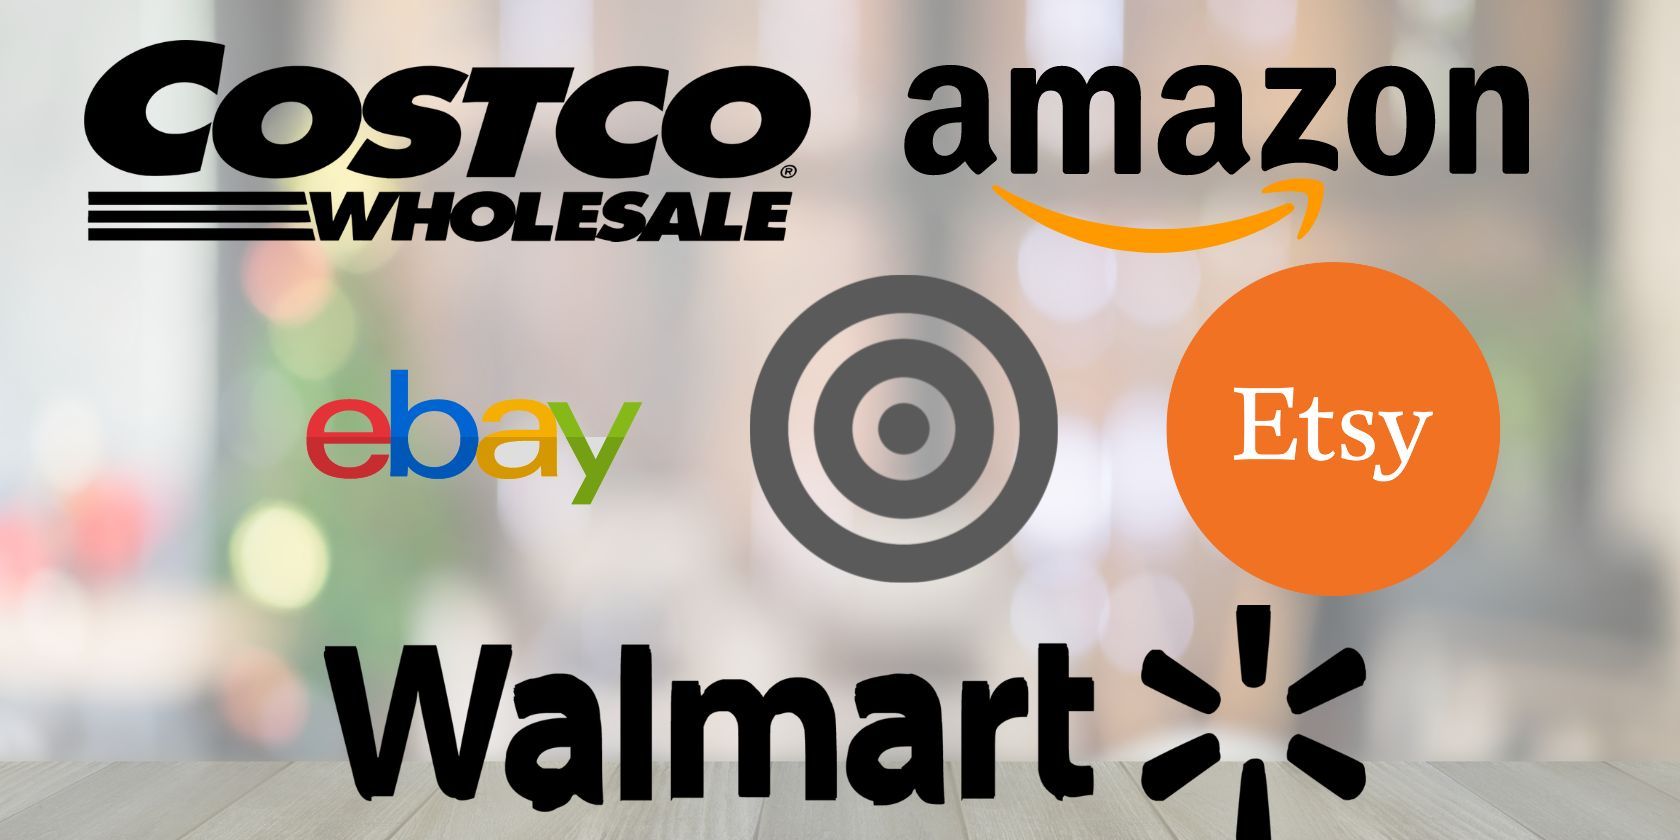 Trusted online shopping brands